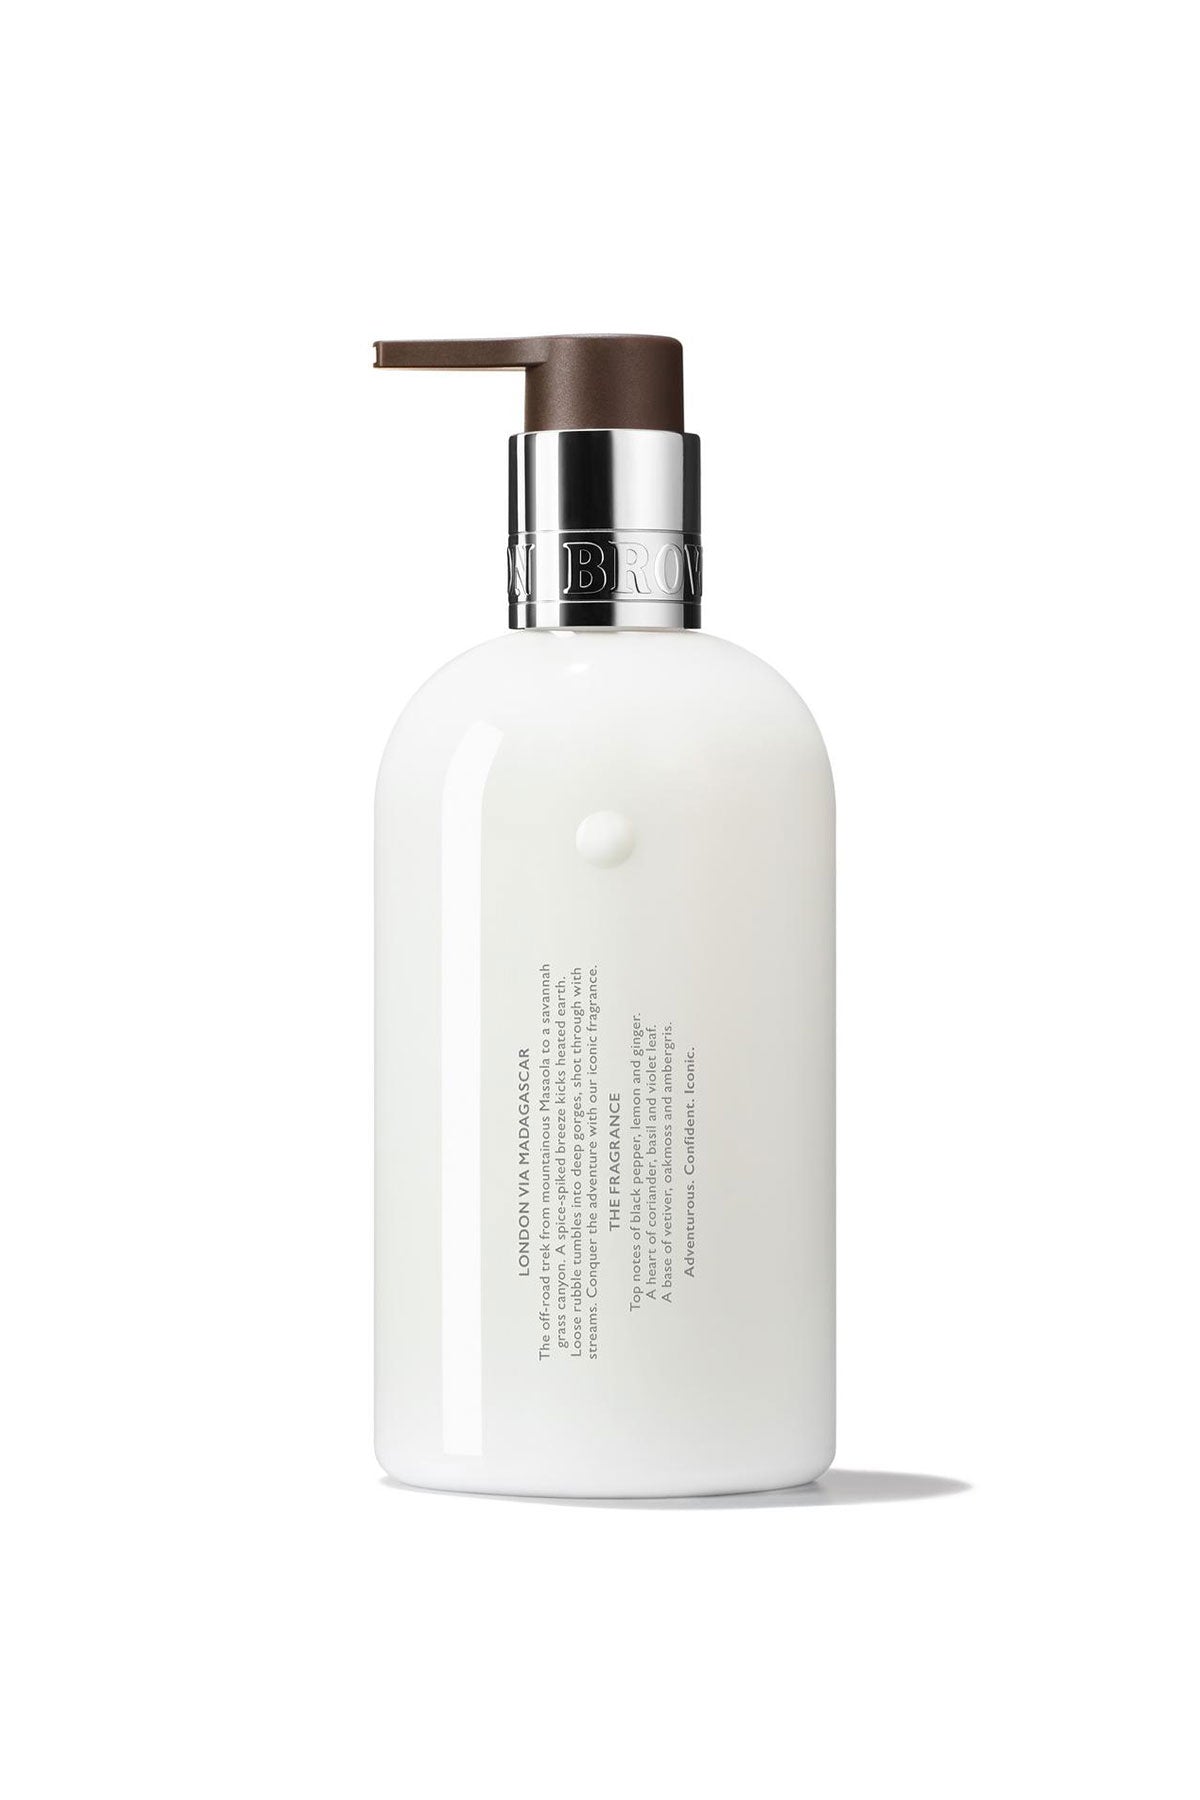 Re-charge Black Pepper Body Lotion 300ml - shop-olivia.com